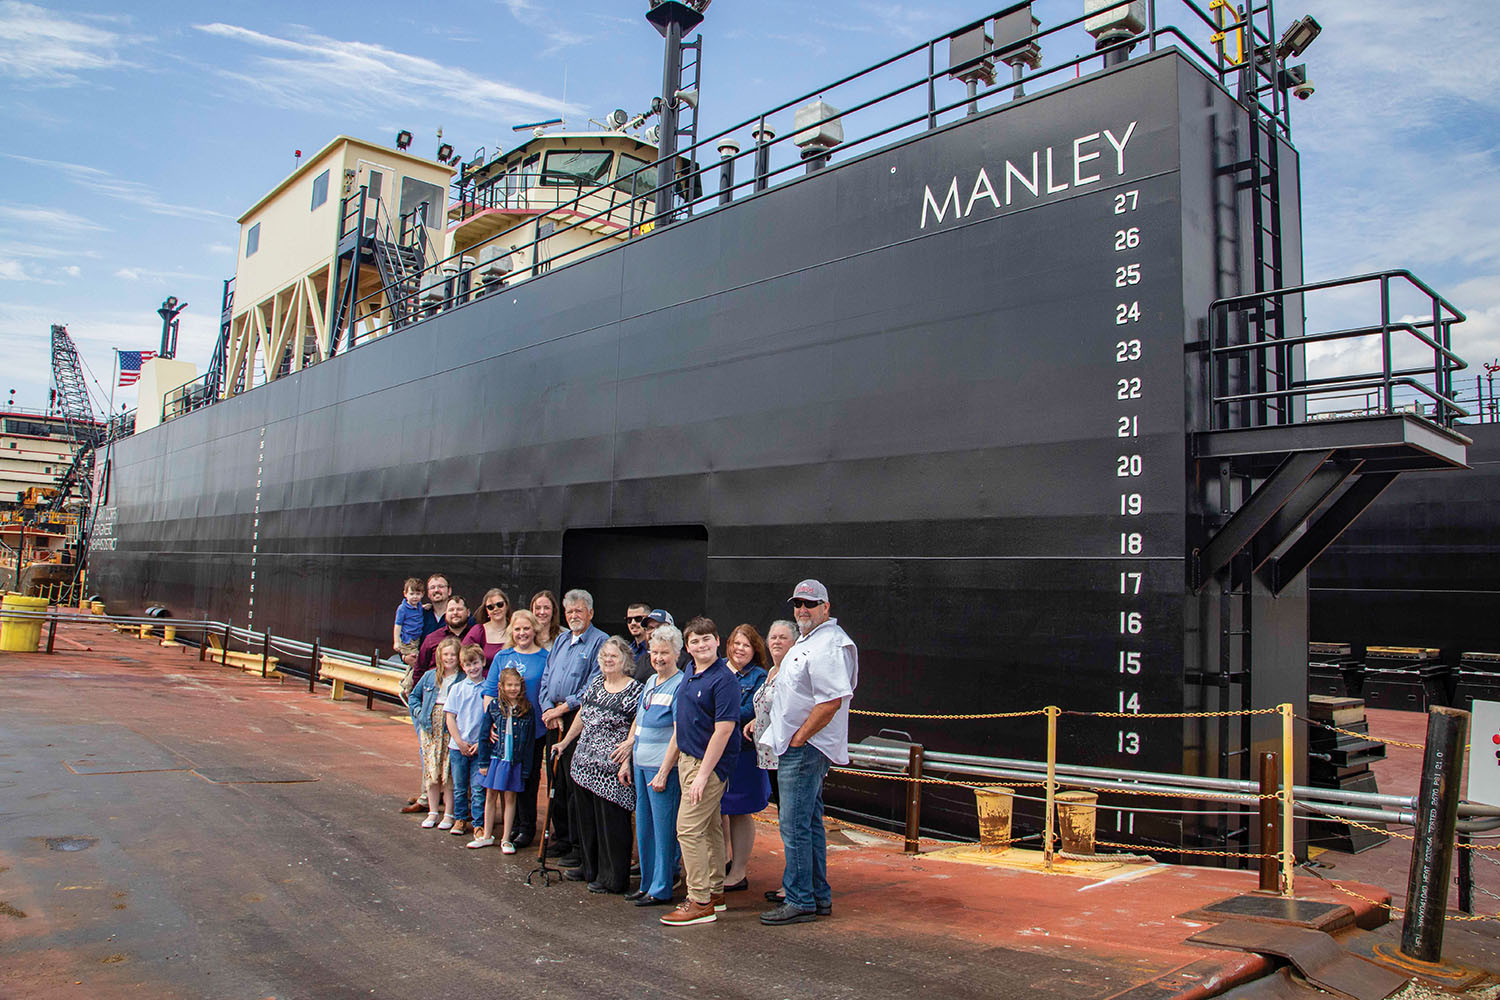 Family members of Billy Manley pose in front of the newly christened drydock Manley at the Ensley Engineer Yard. (Photo by Vance Harris/Memphis Engineer District)